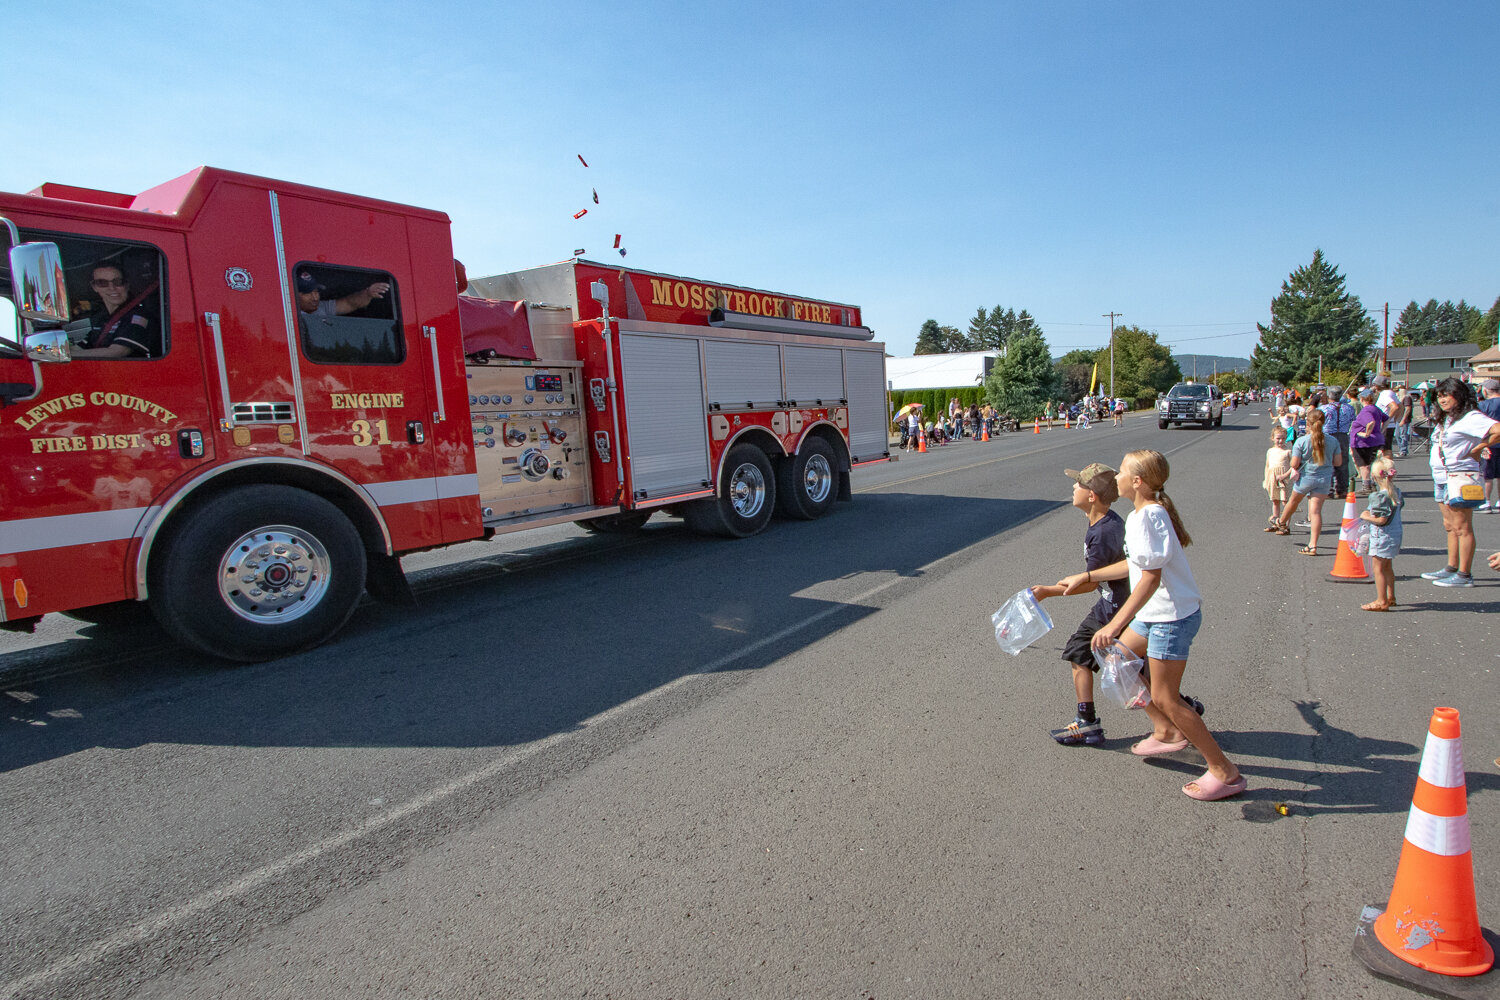 Firefighters from Lewis County Fire District 3 toss candy out to parade-goers on Saturday, Sept. 16, during the Mexican Independence Day celebration in Mossyrock.